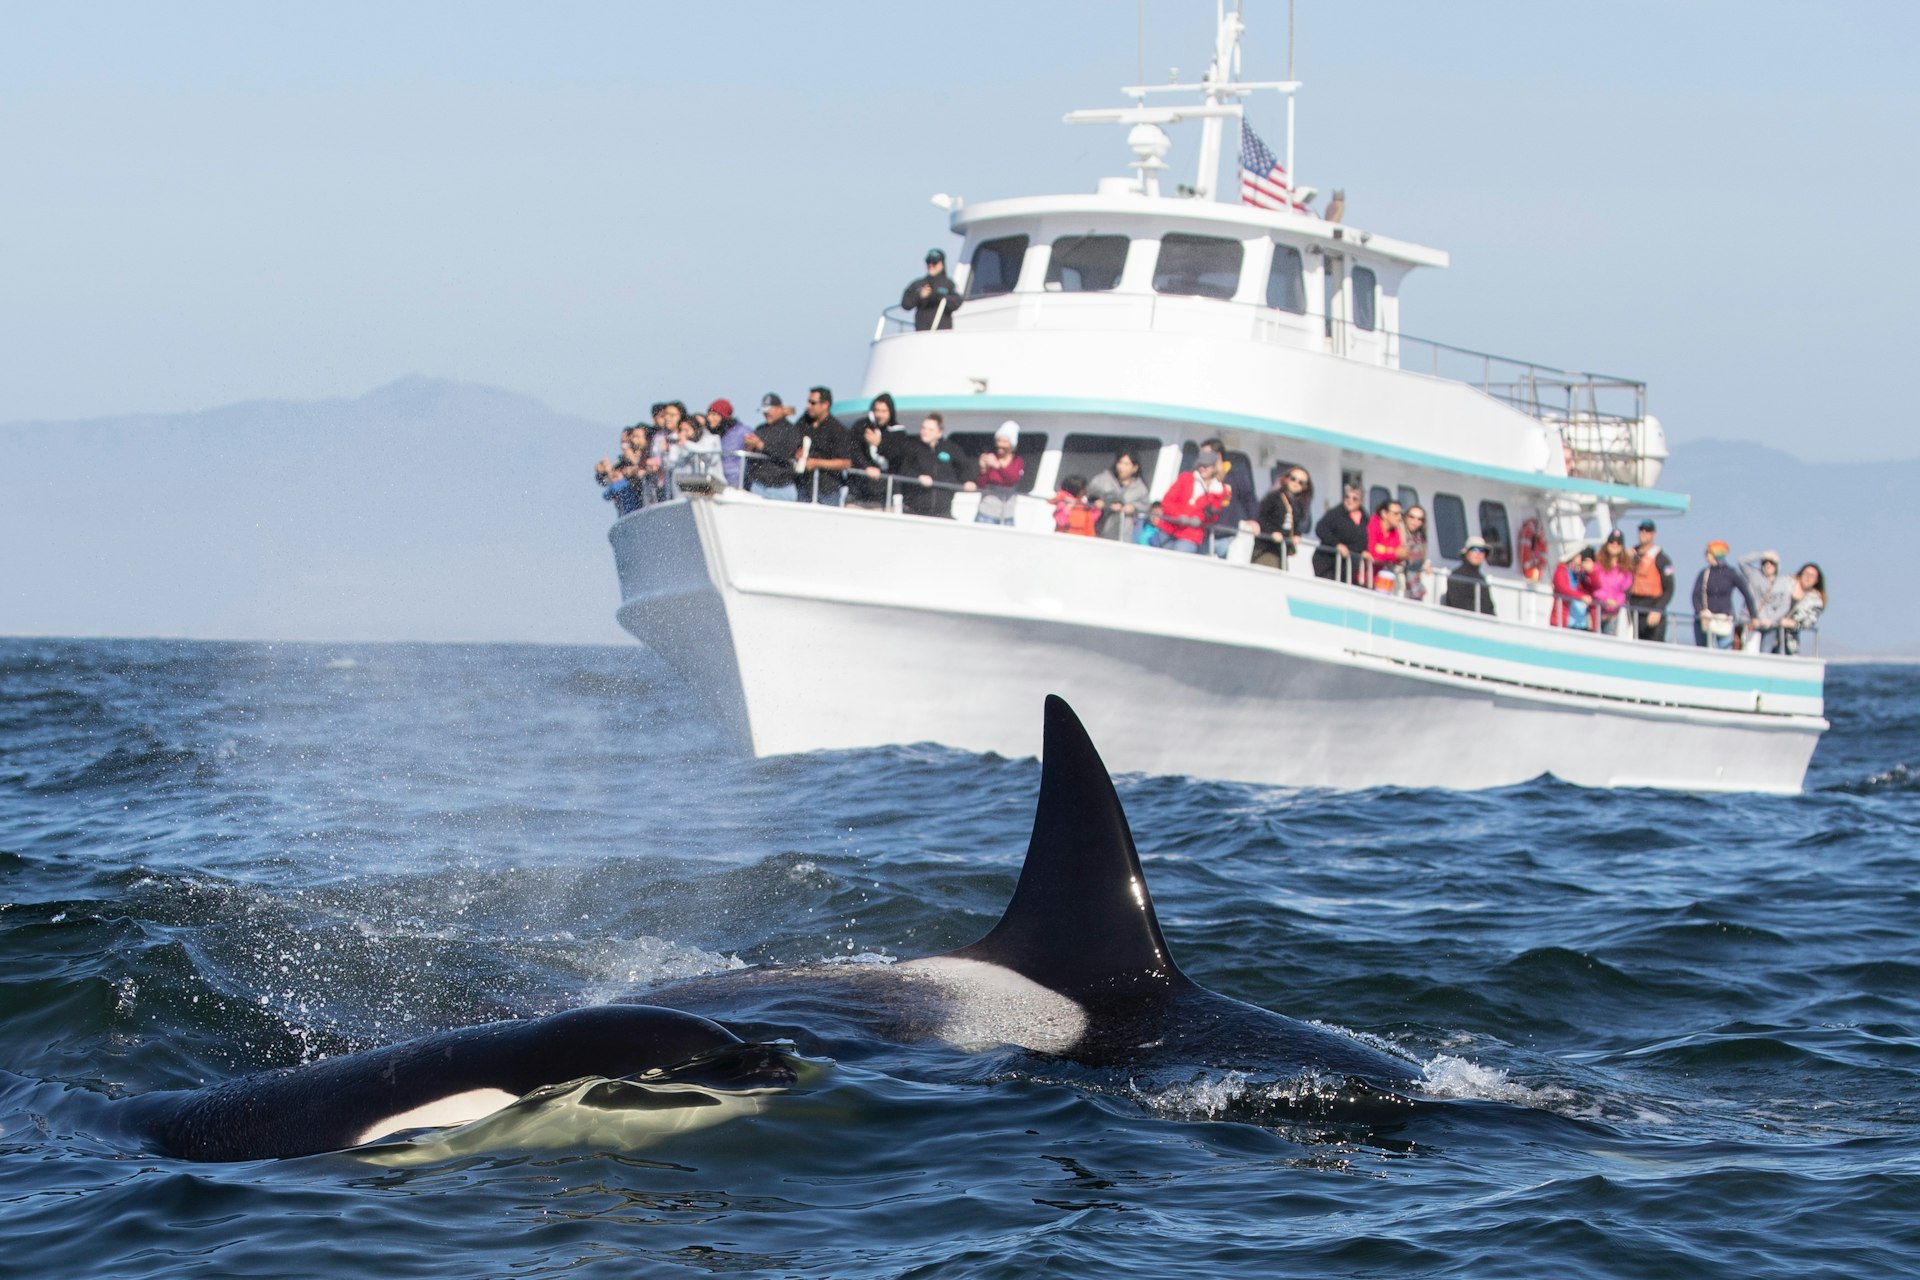 Guests on a tour boat in Alaska watch two killer whales.